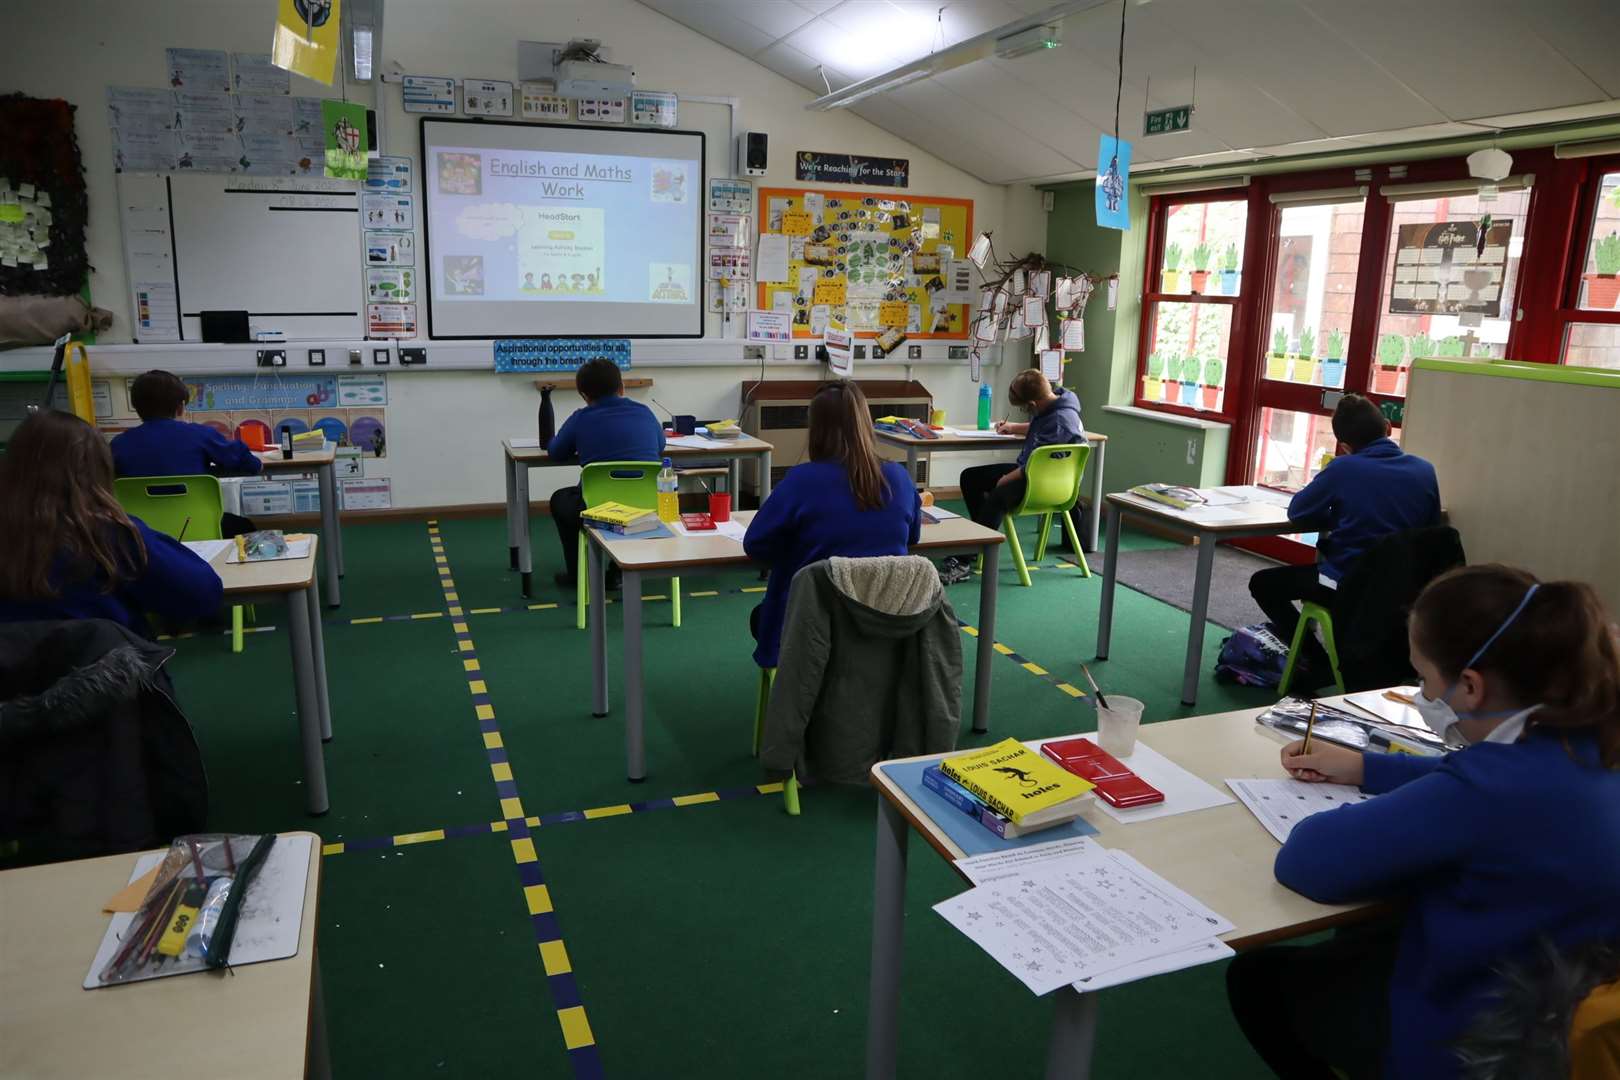 A class from St George's CE Primary School in Minster, Sheppey have been told to stay at home